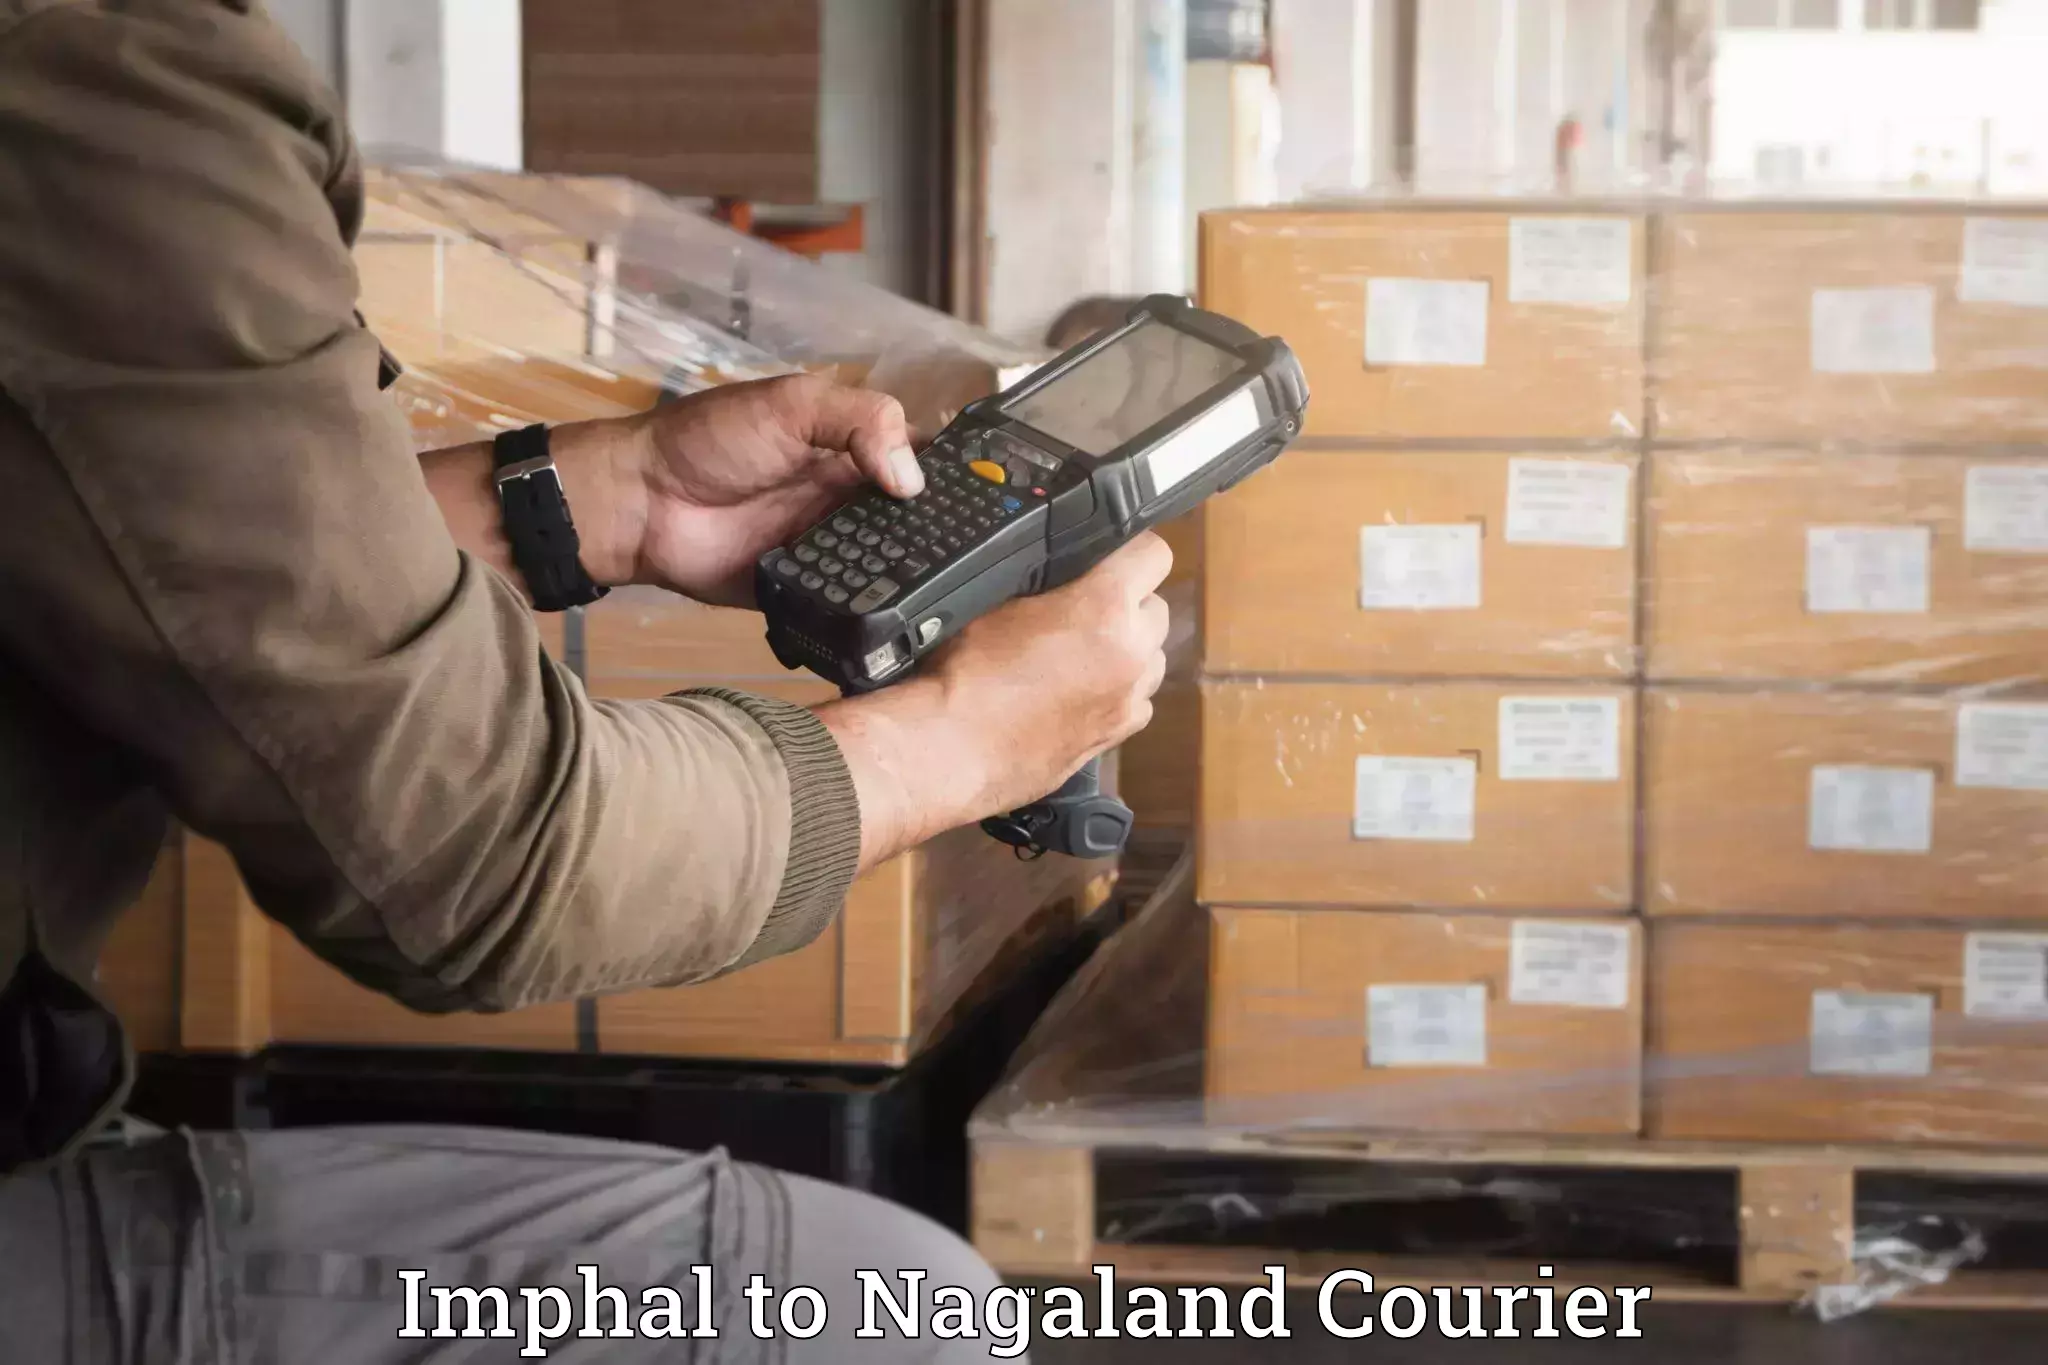 Luggage delivery app Imphal to Nagaland